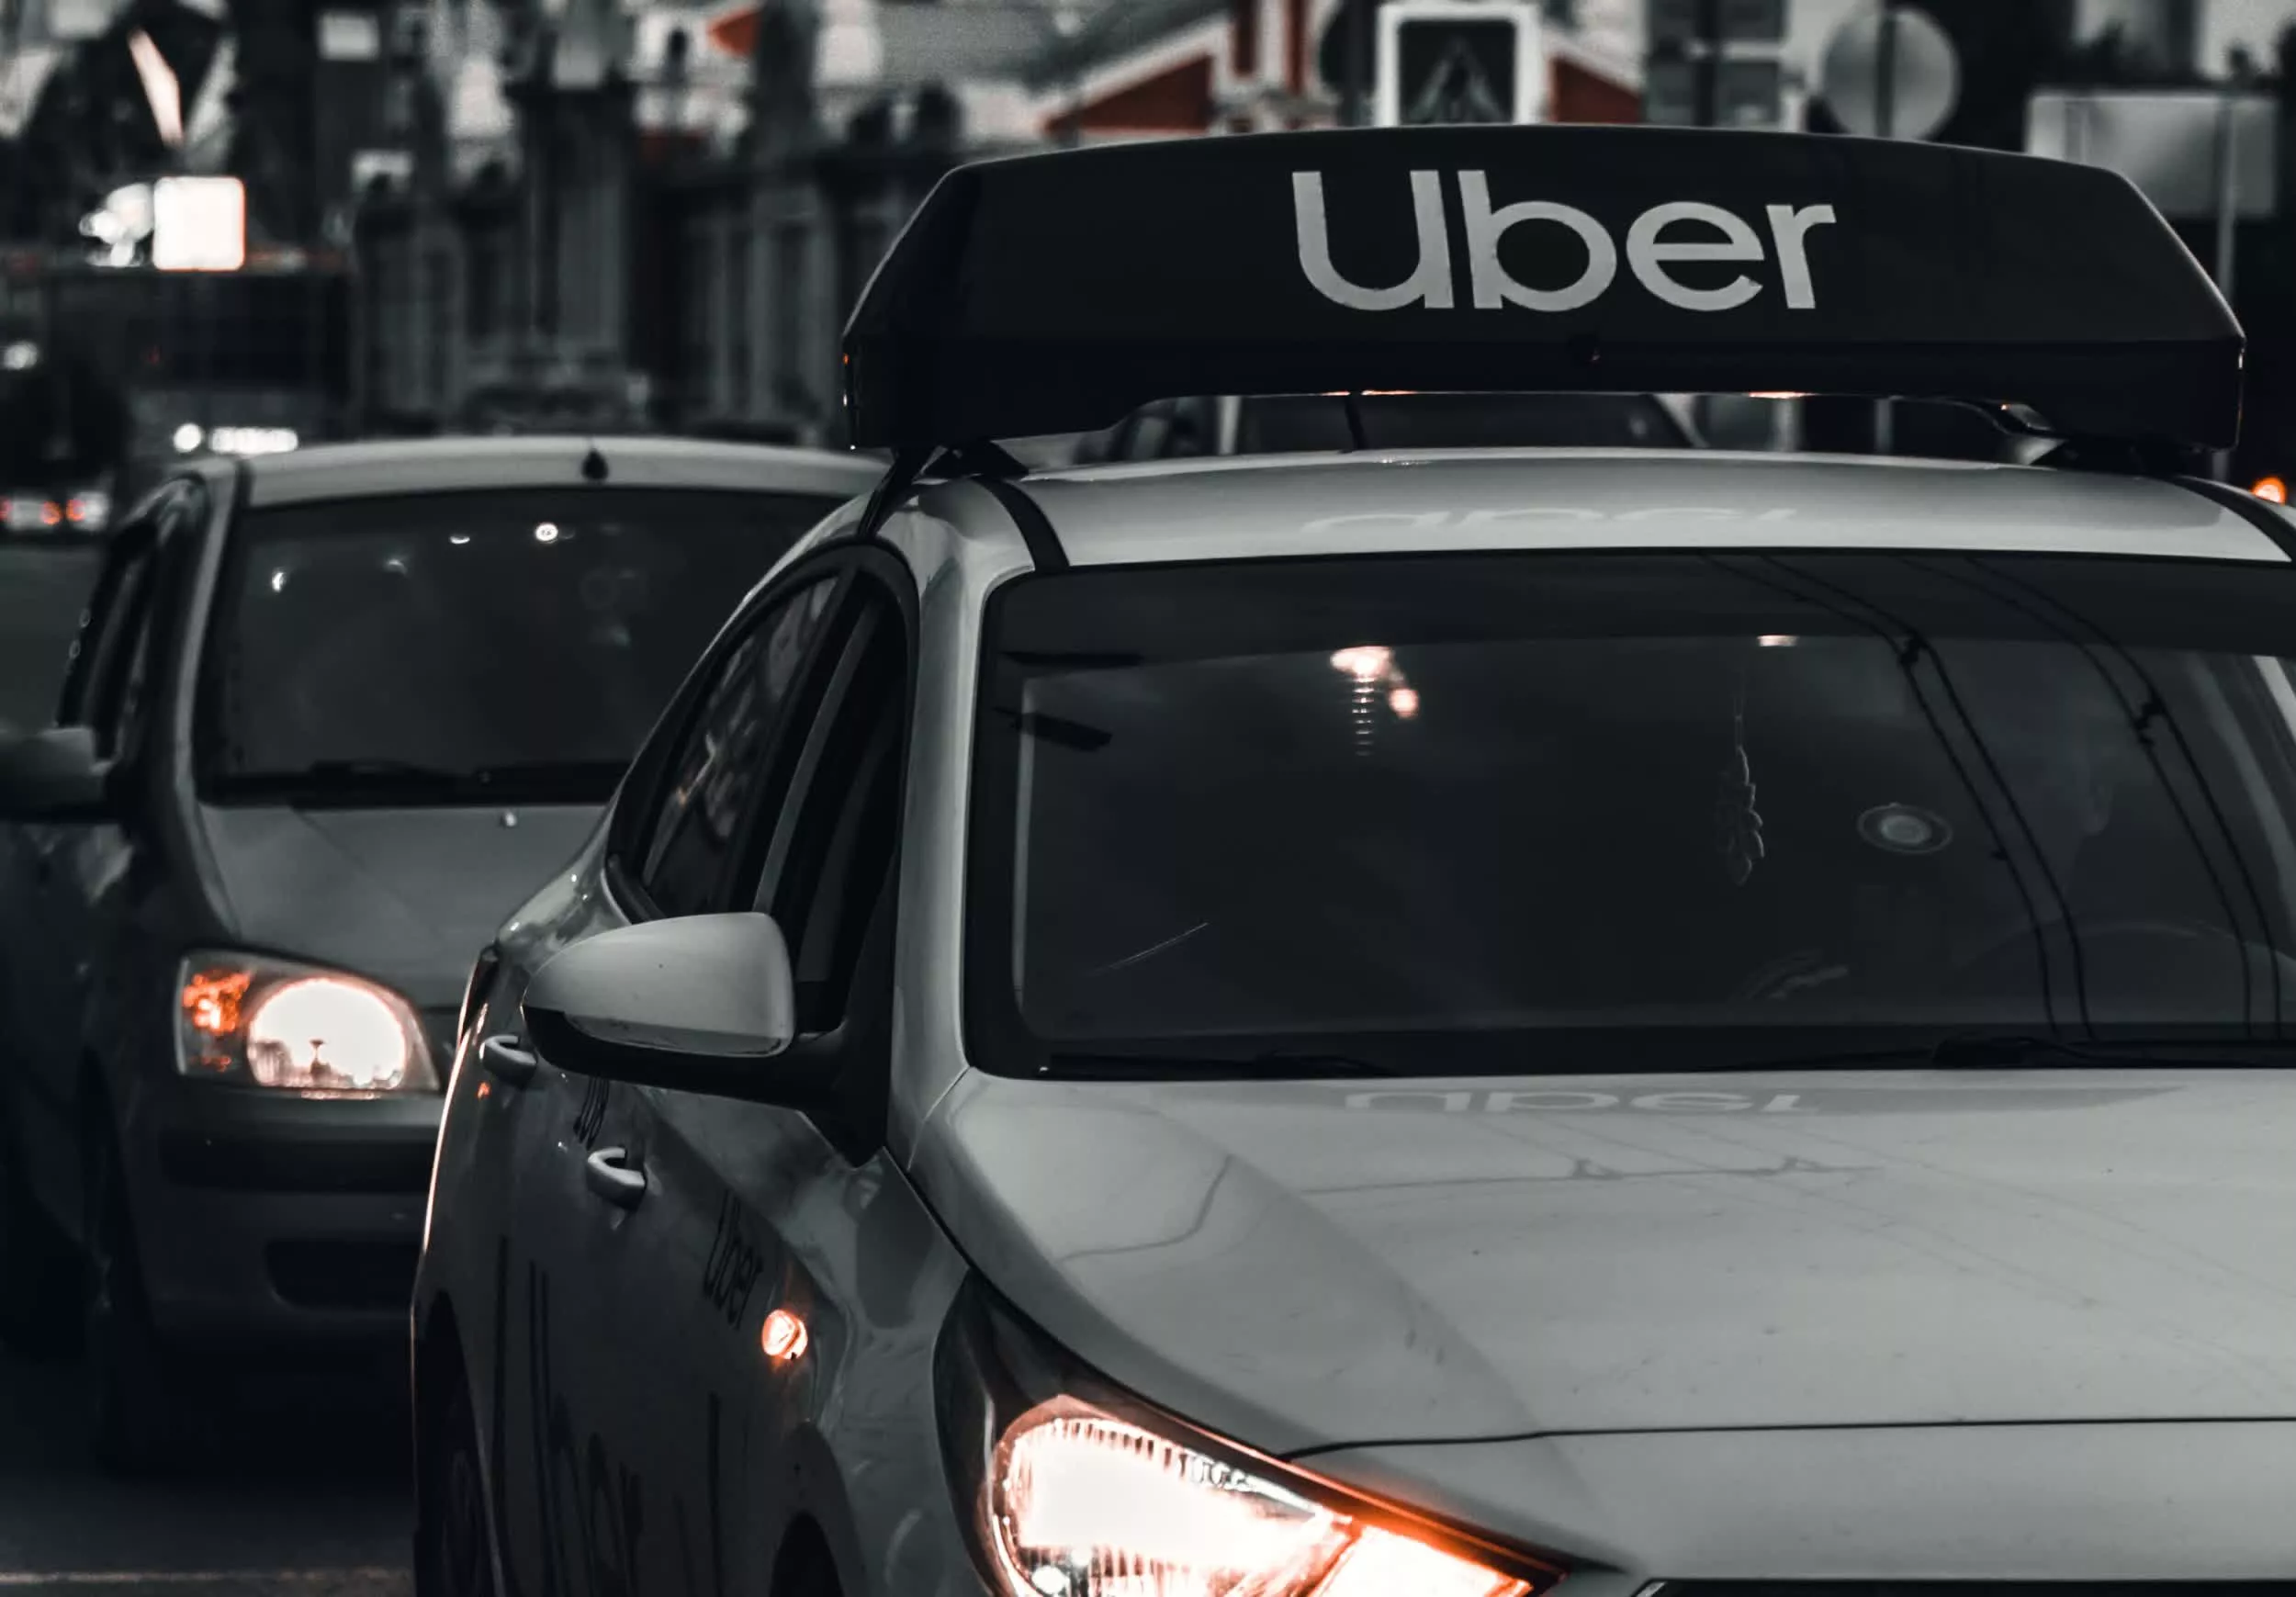 Uber is working with automakers to develop custom ride sharing and delivery vehicles